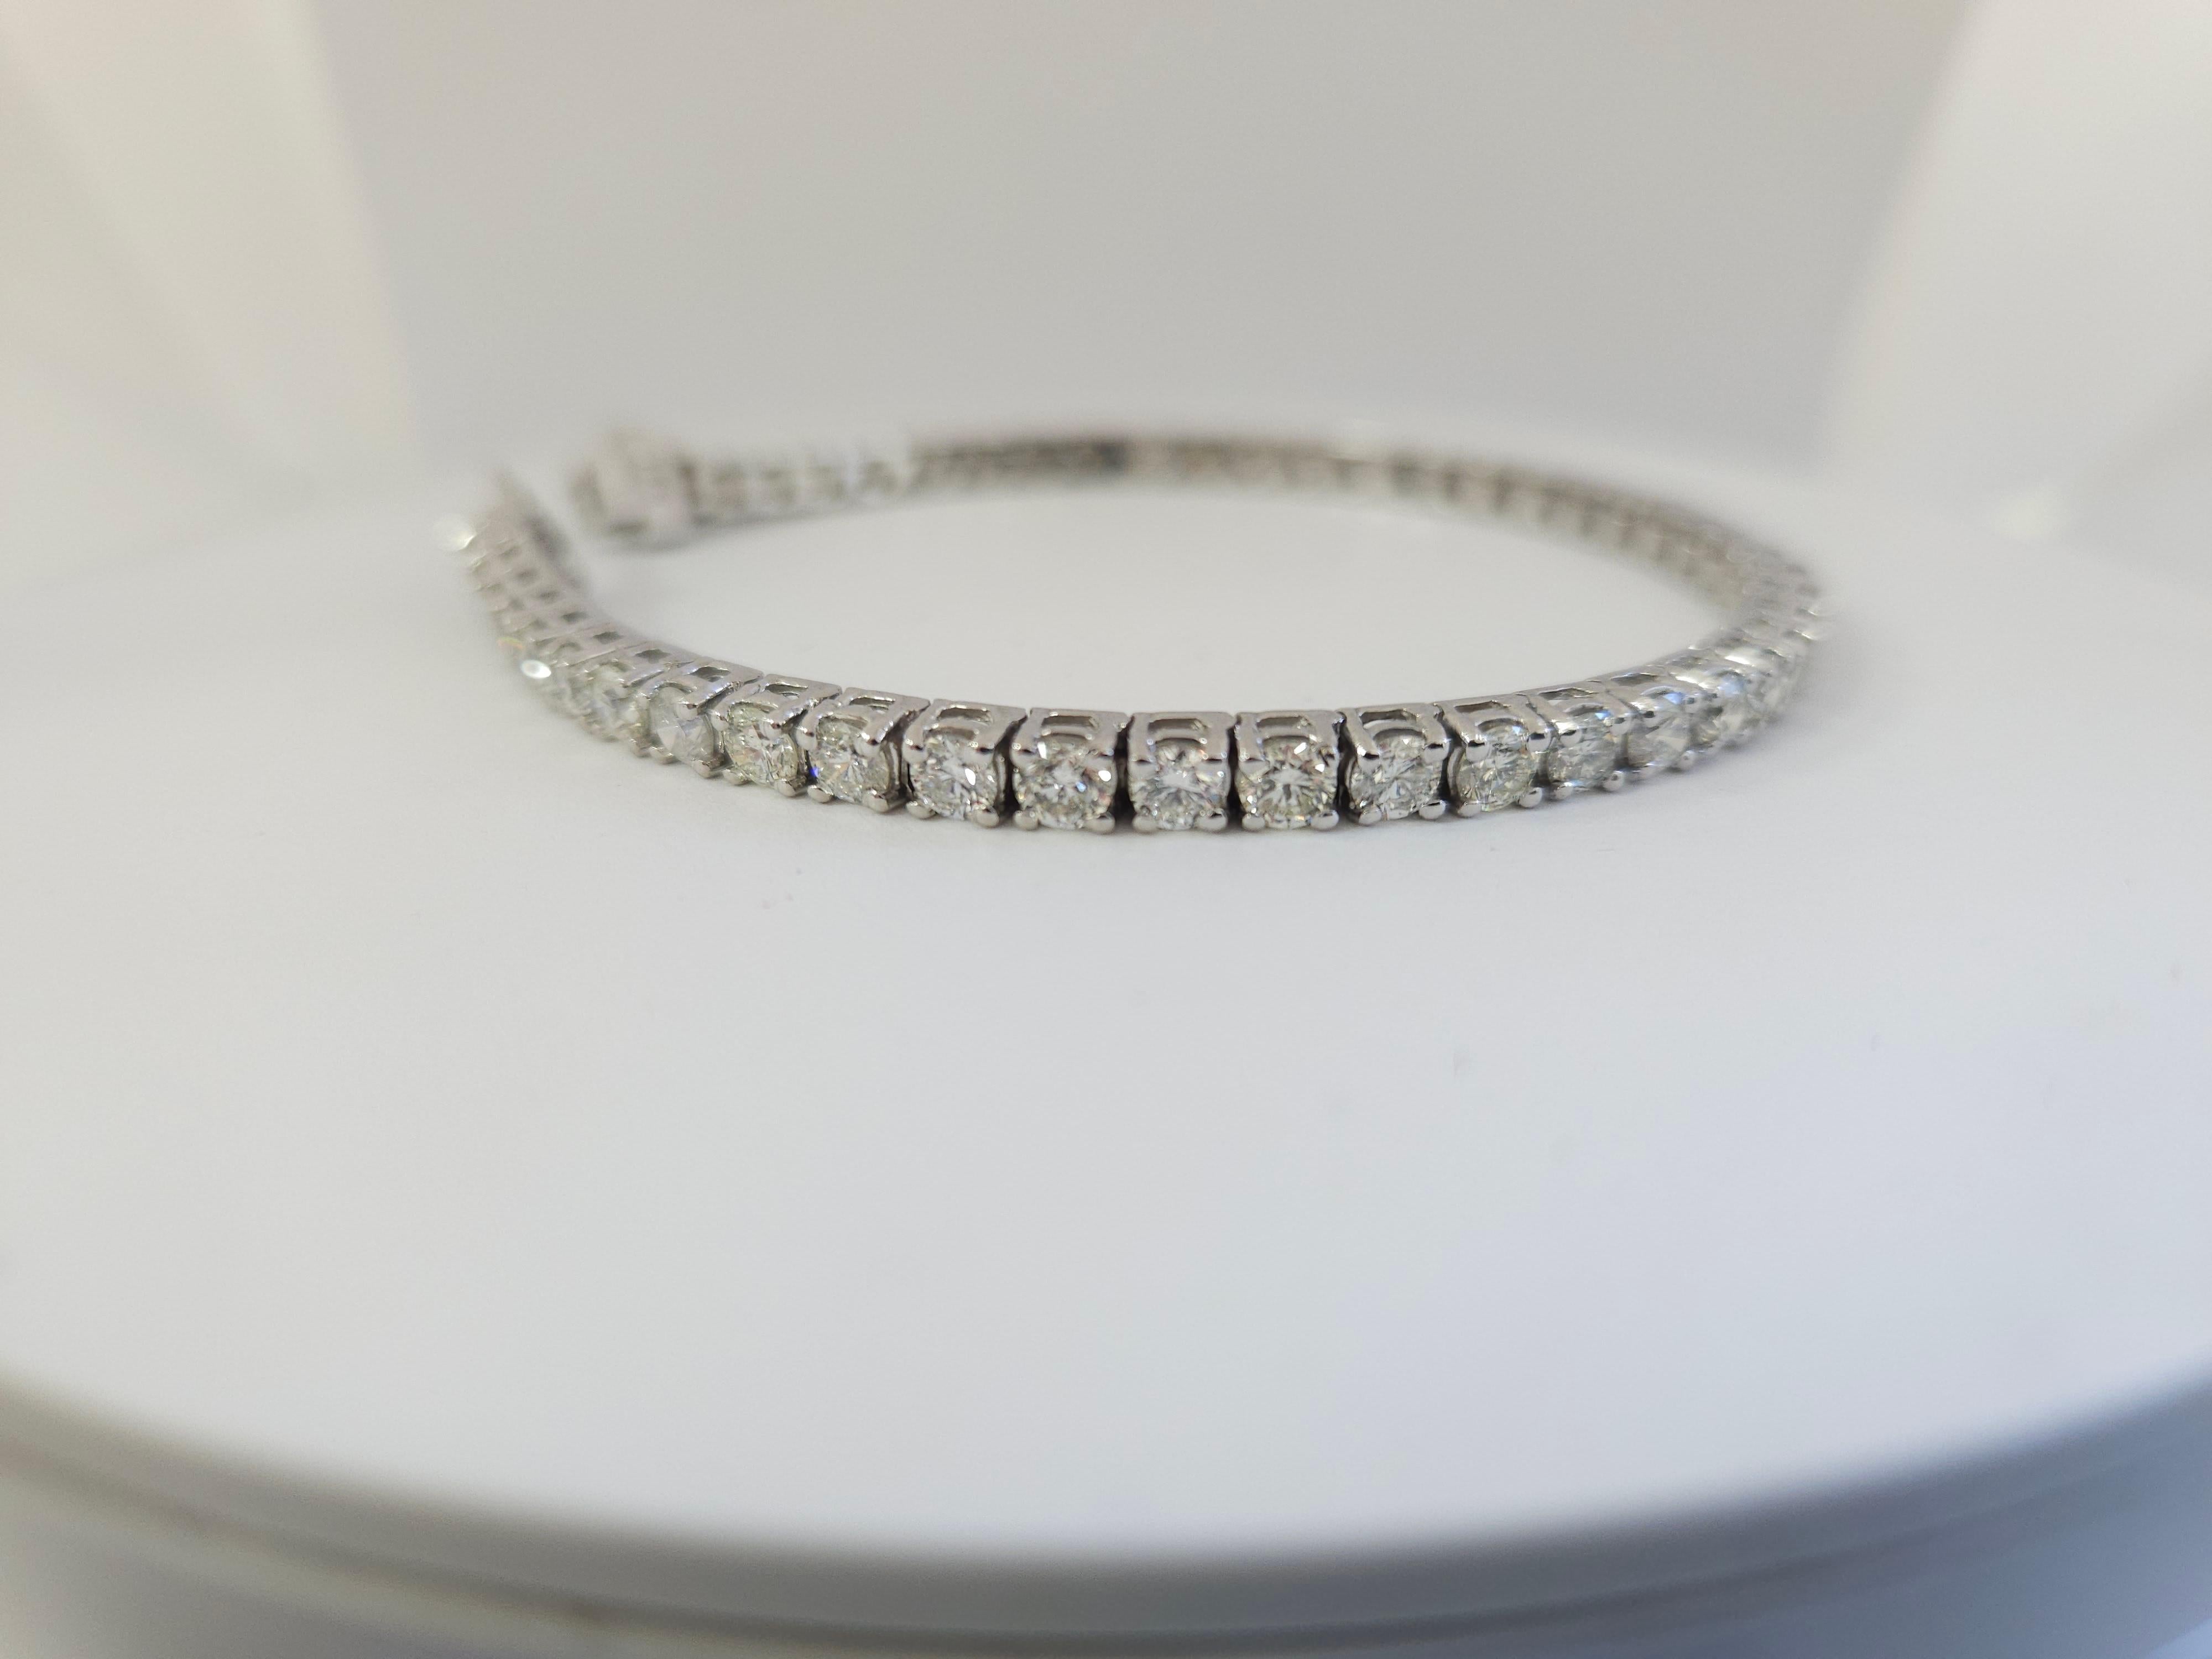 7.51 Carat Round Brilliant Cut Diamond Tennis Bracelet 14 Karat White Gold In New Condition For Sale In Great Neck, NY